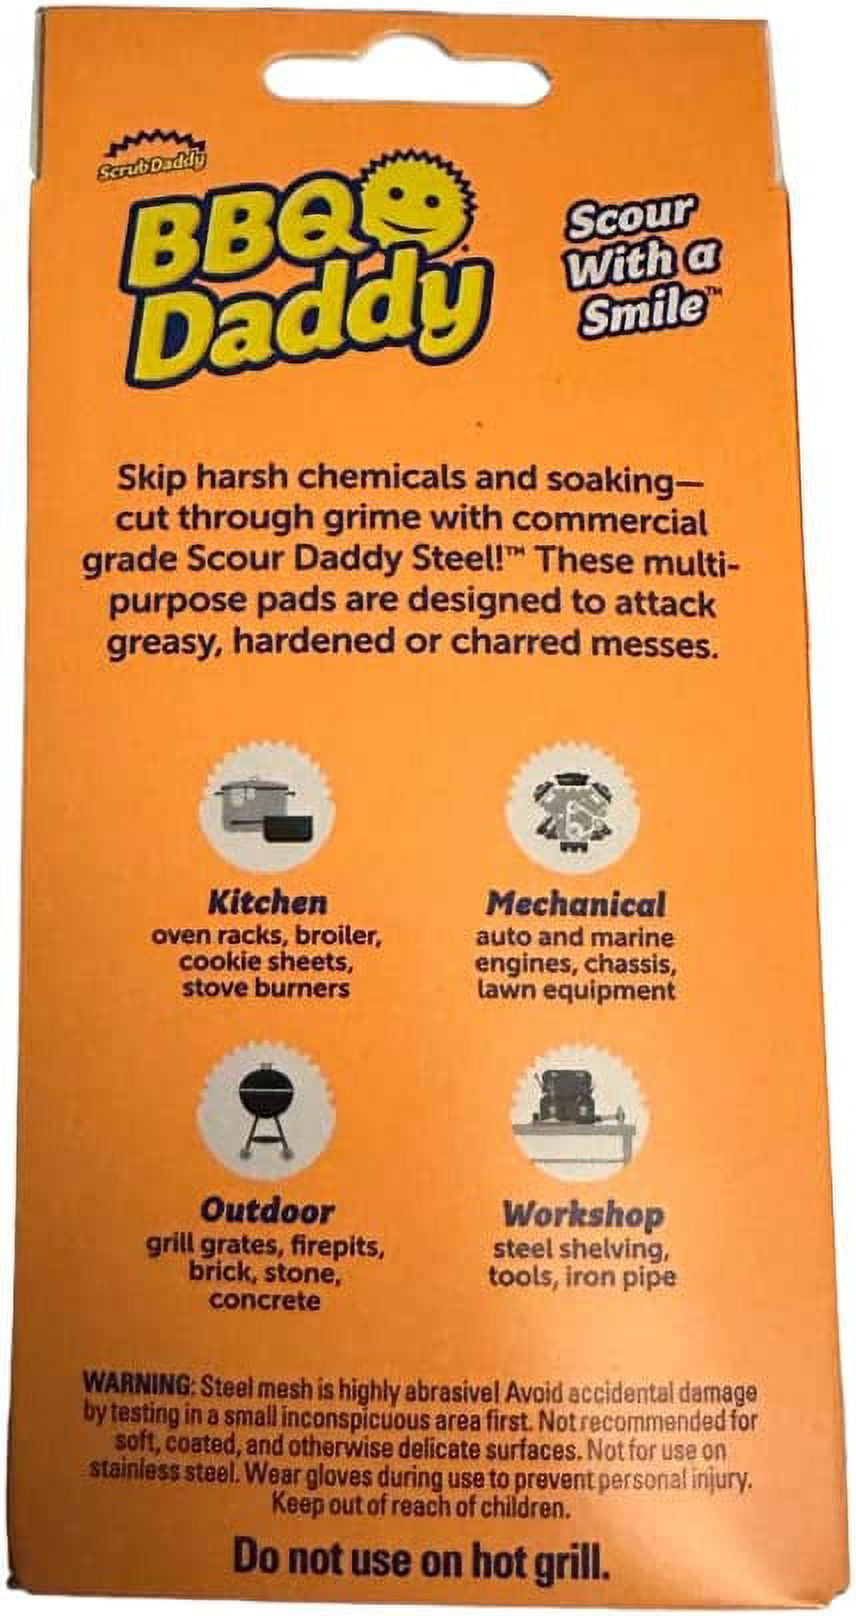 BBQ DADDY Scrub Daddy Steam Cleaning Grill Scrubber – St. John's Institute  (Hua Ming)